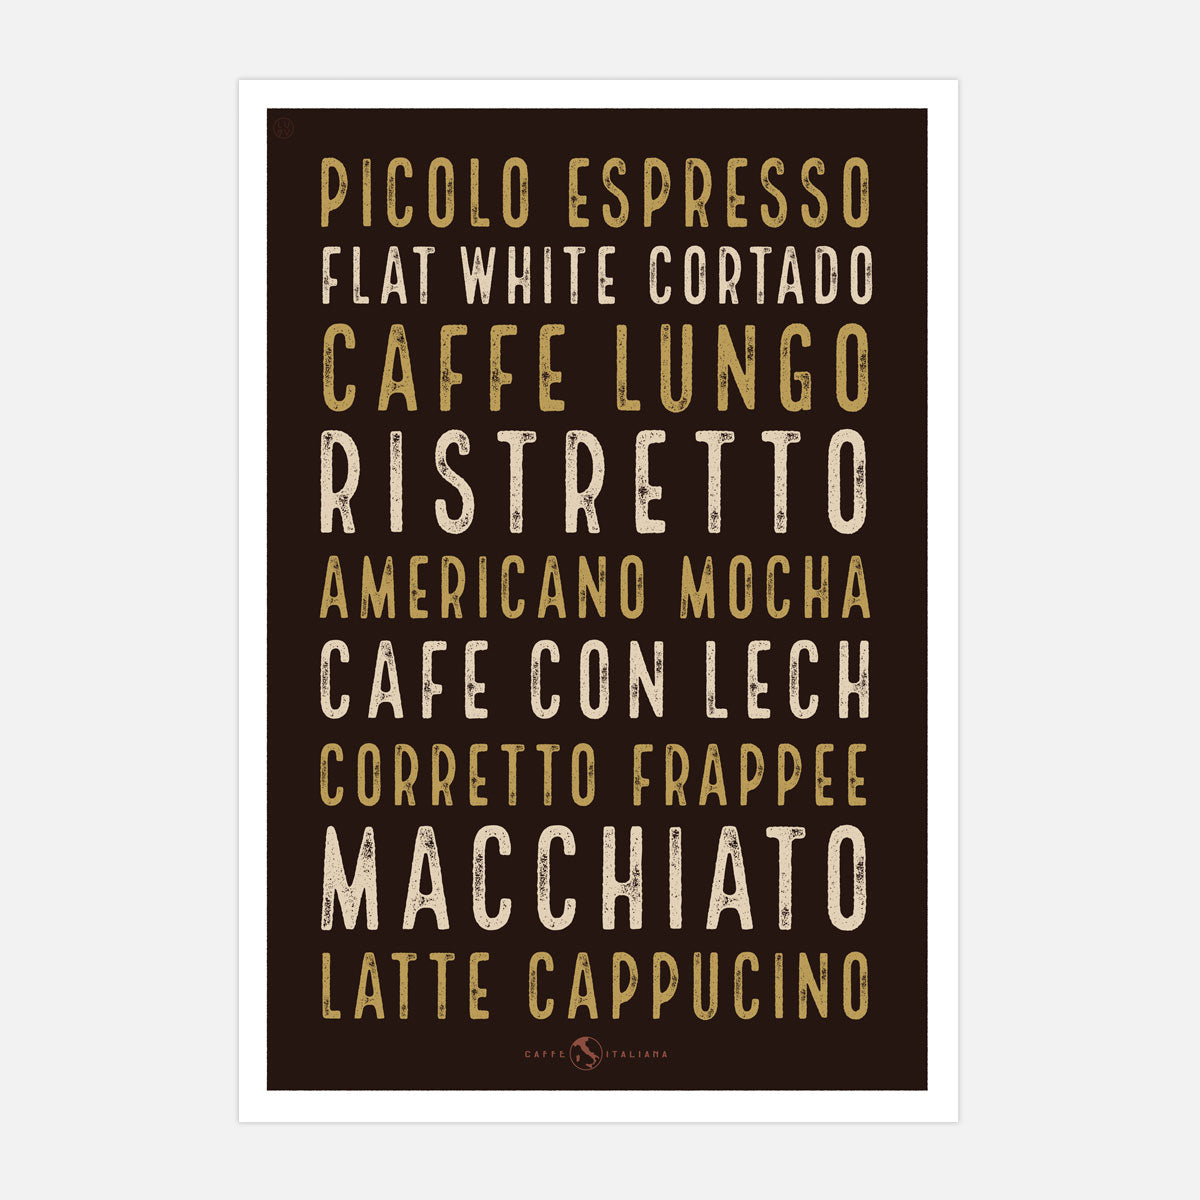 Italian cafe coffee retro print from Places We Luv